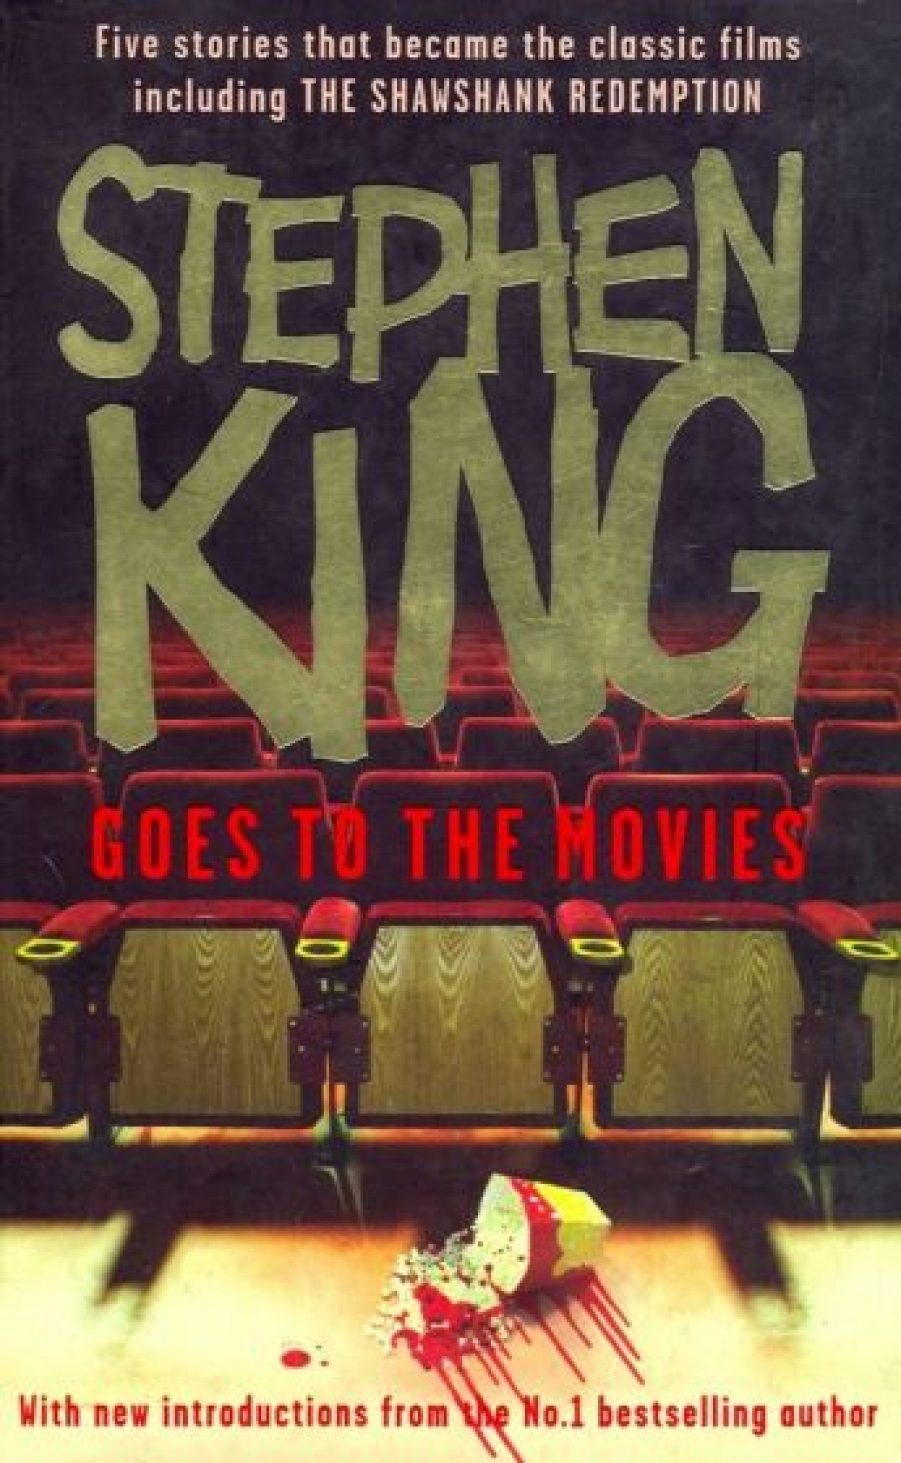 King S. Stephen King Goes to Movies (omnibus) 